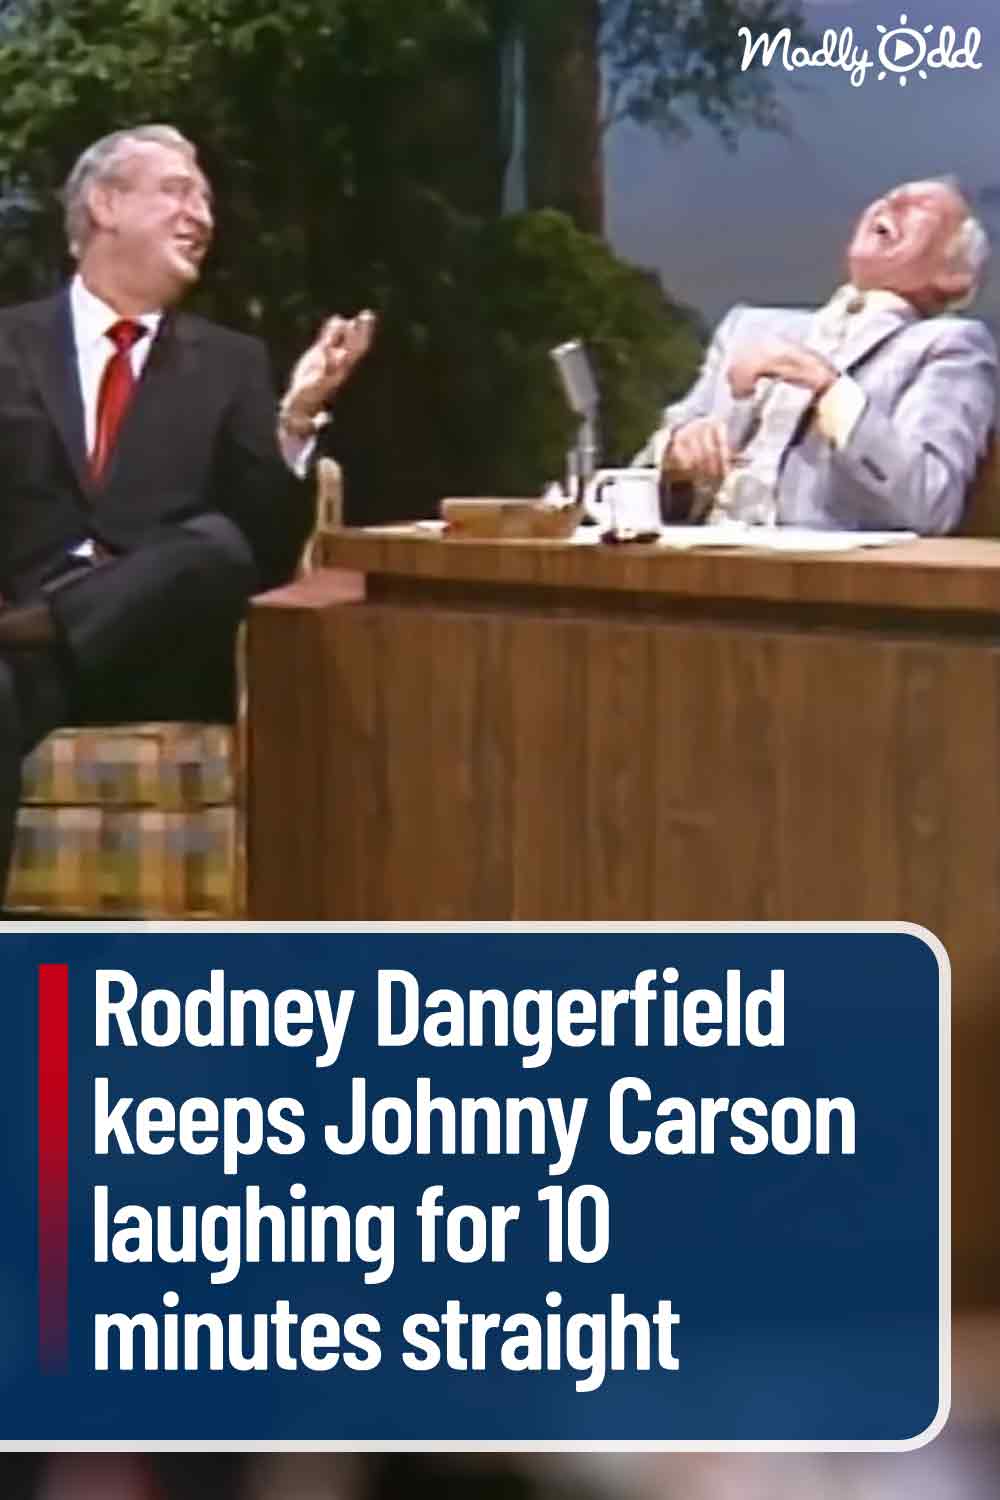 Rodney Dangerfield keeps Johnny Carson laughing for 10 minutes straight